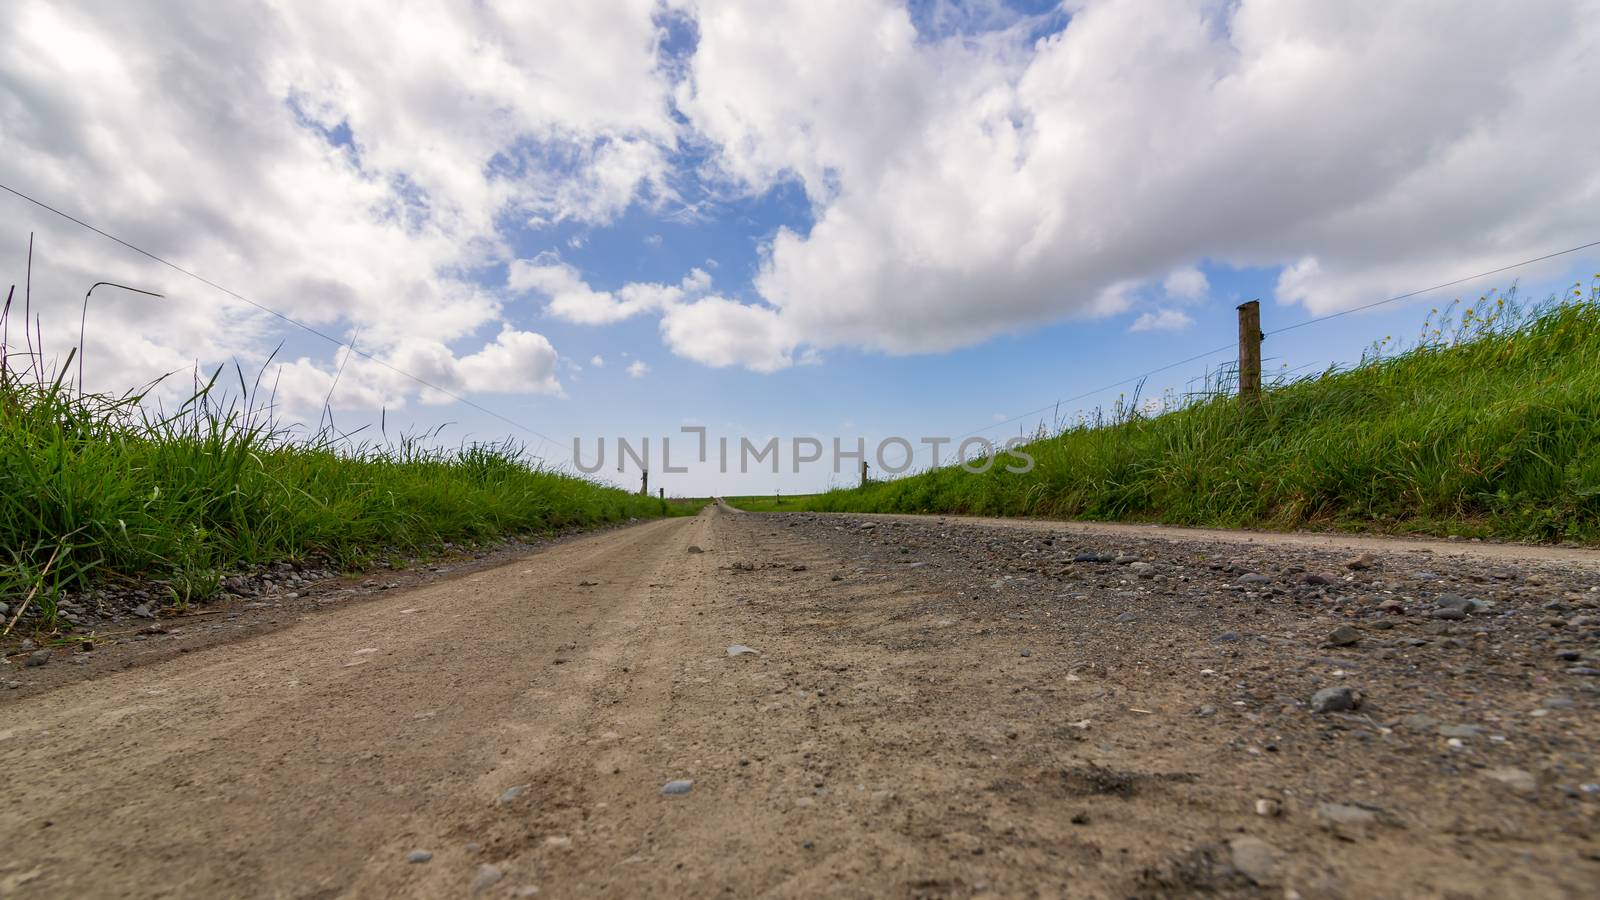 Dirt Road Under Partly-Cloudy Skies, Northern California by backyard_photography